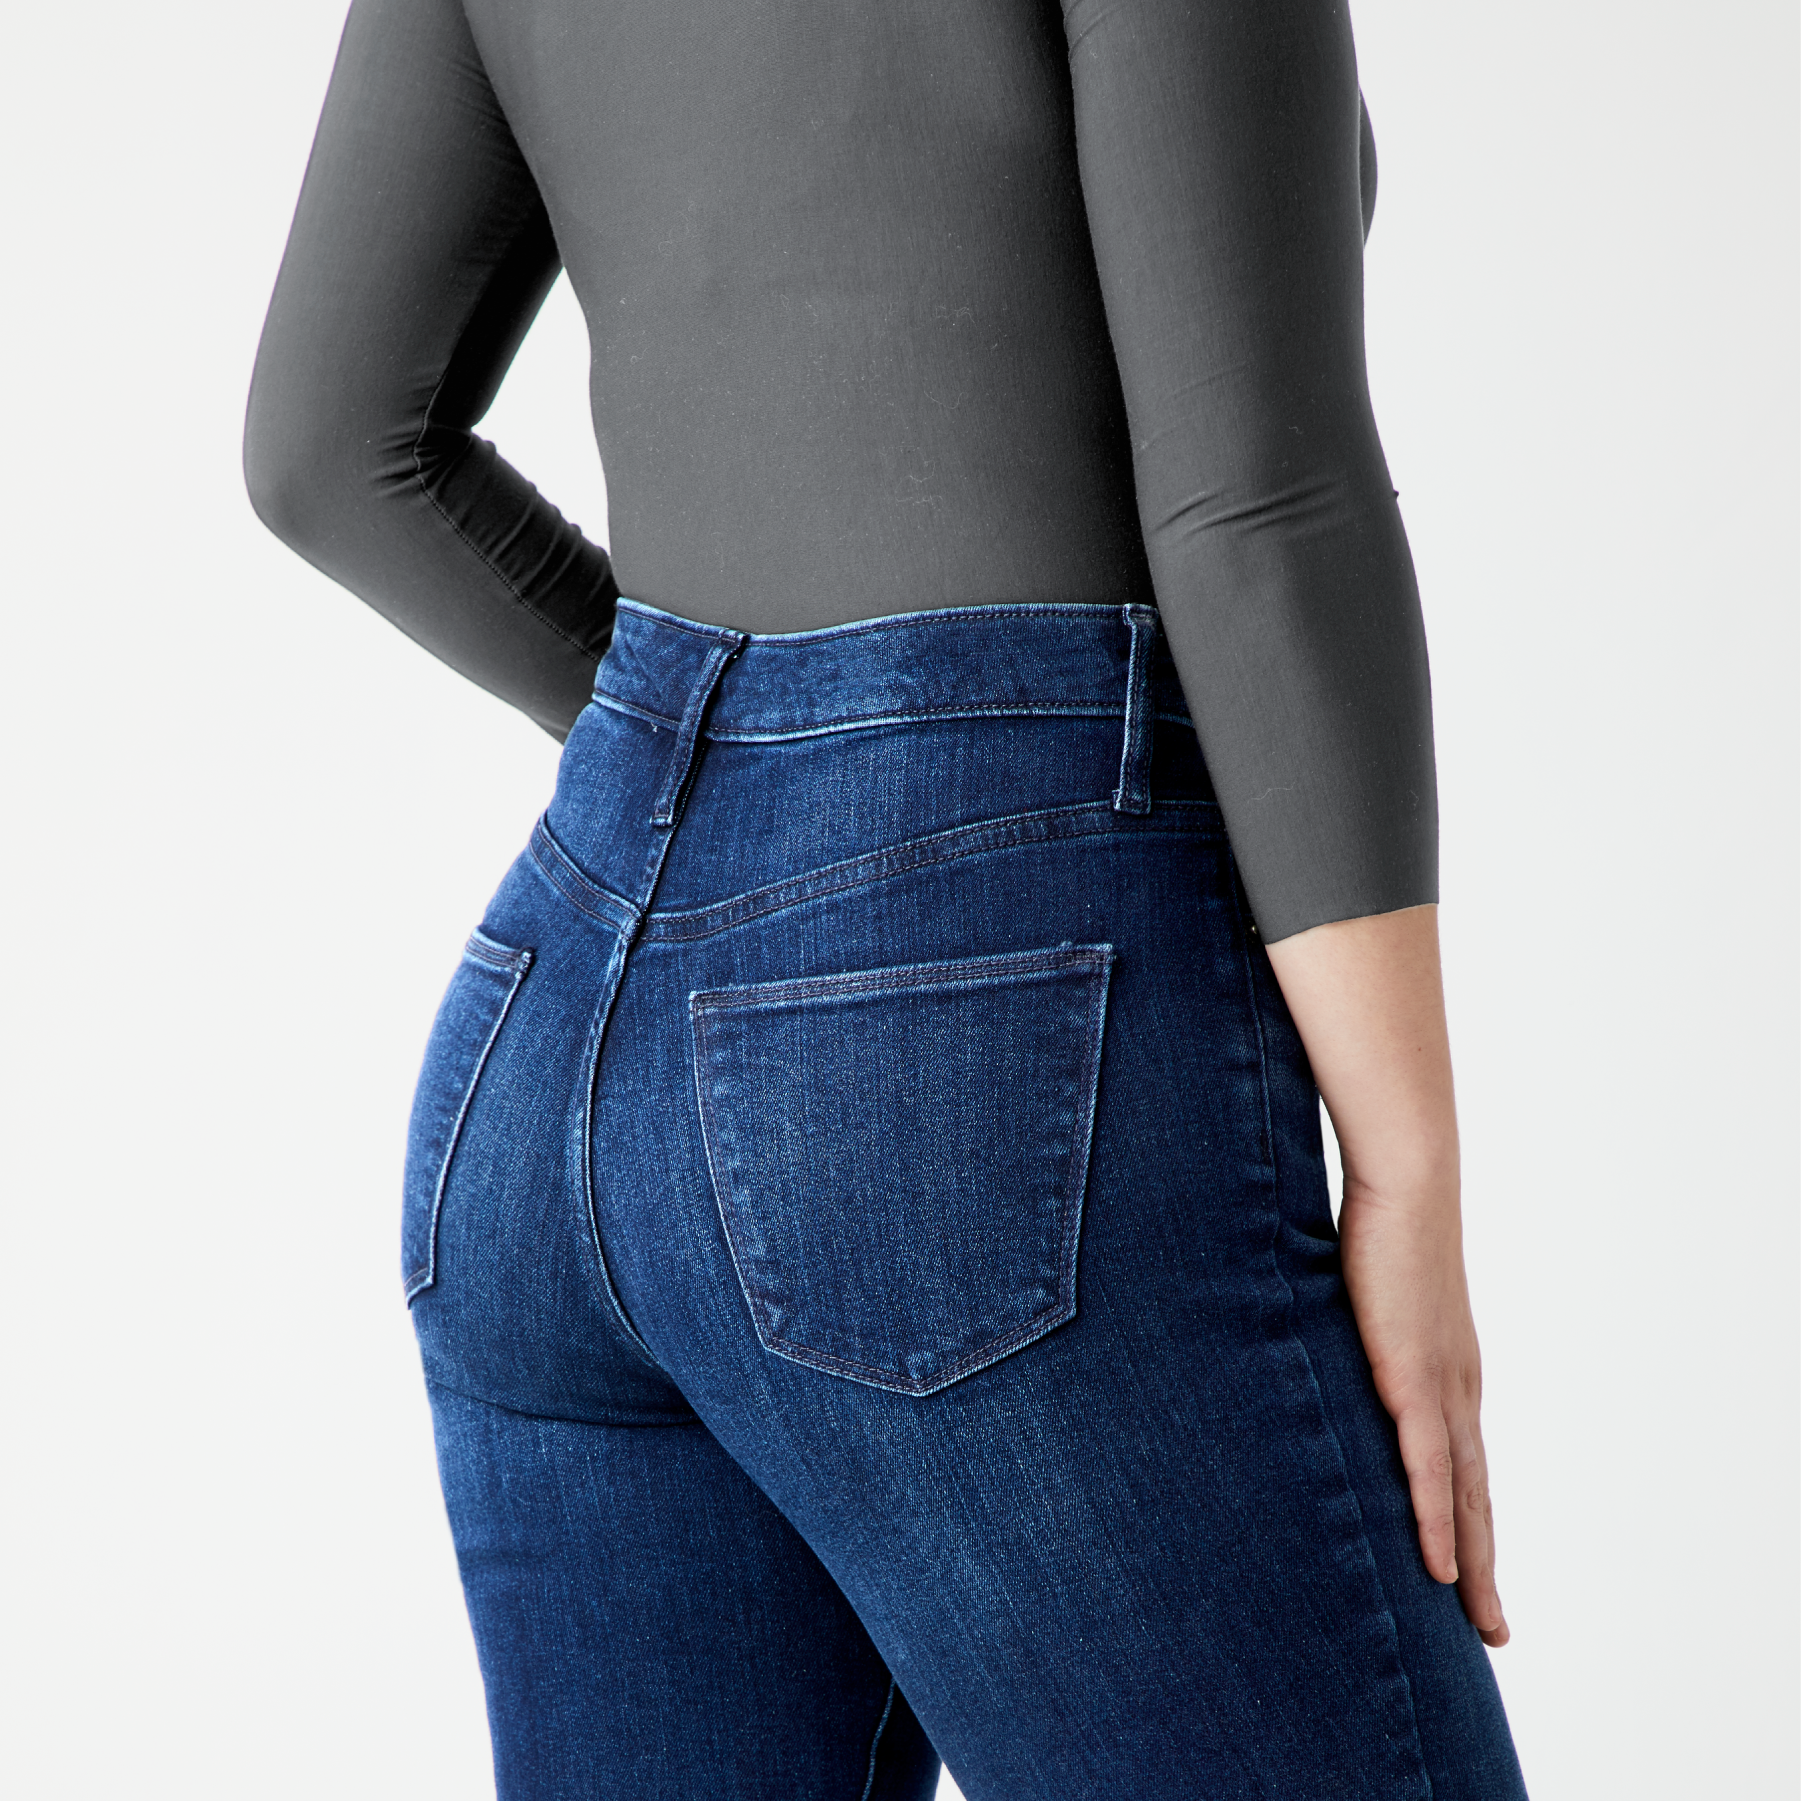 best skinny jeans for flat bum